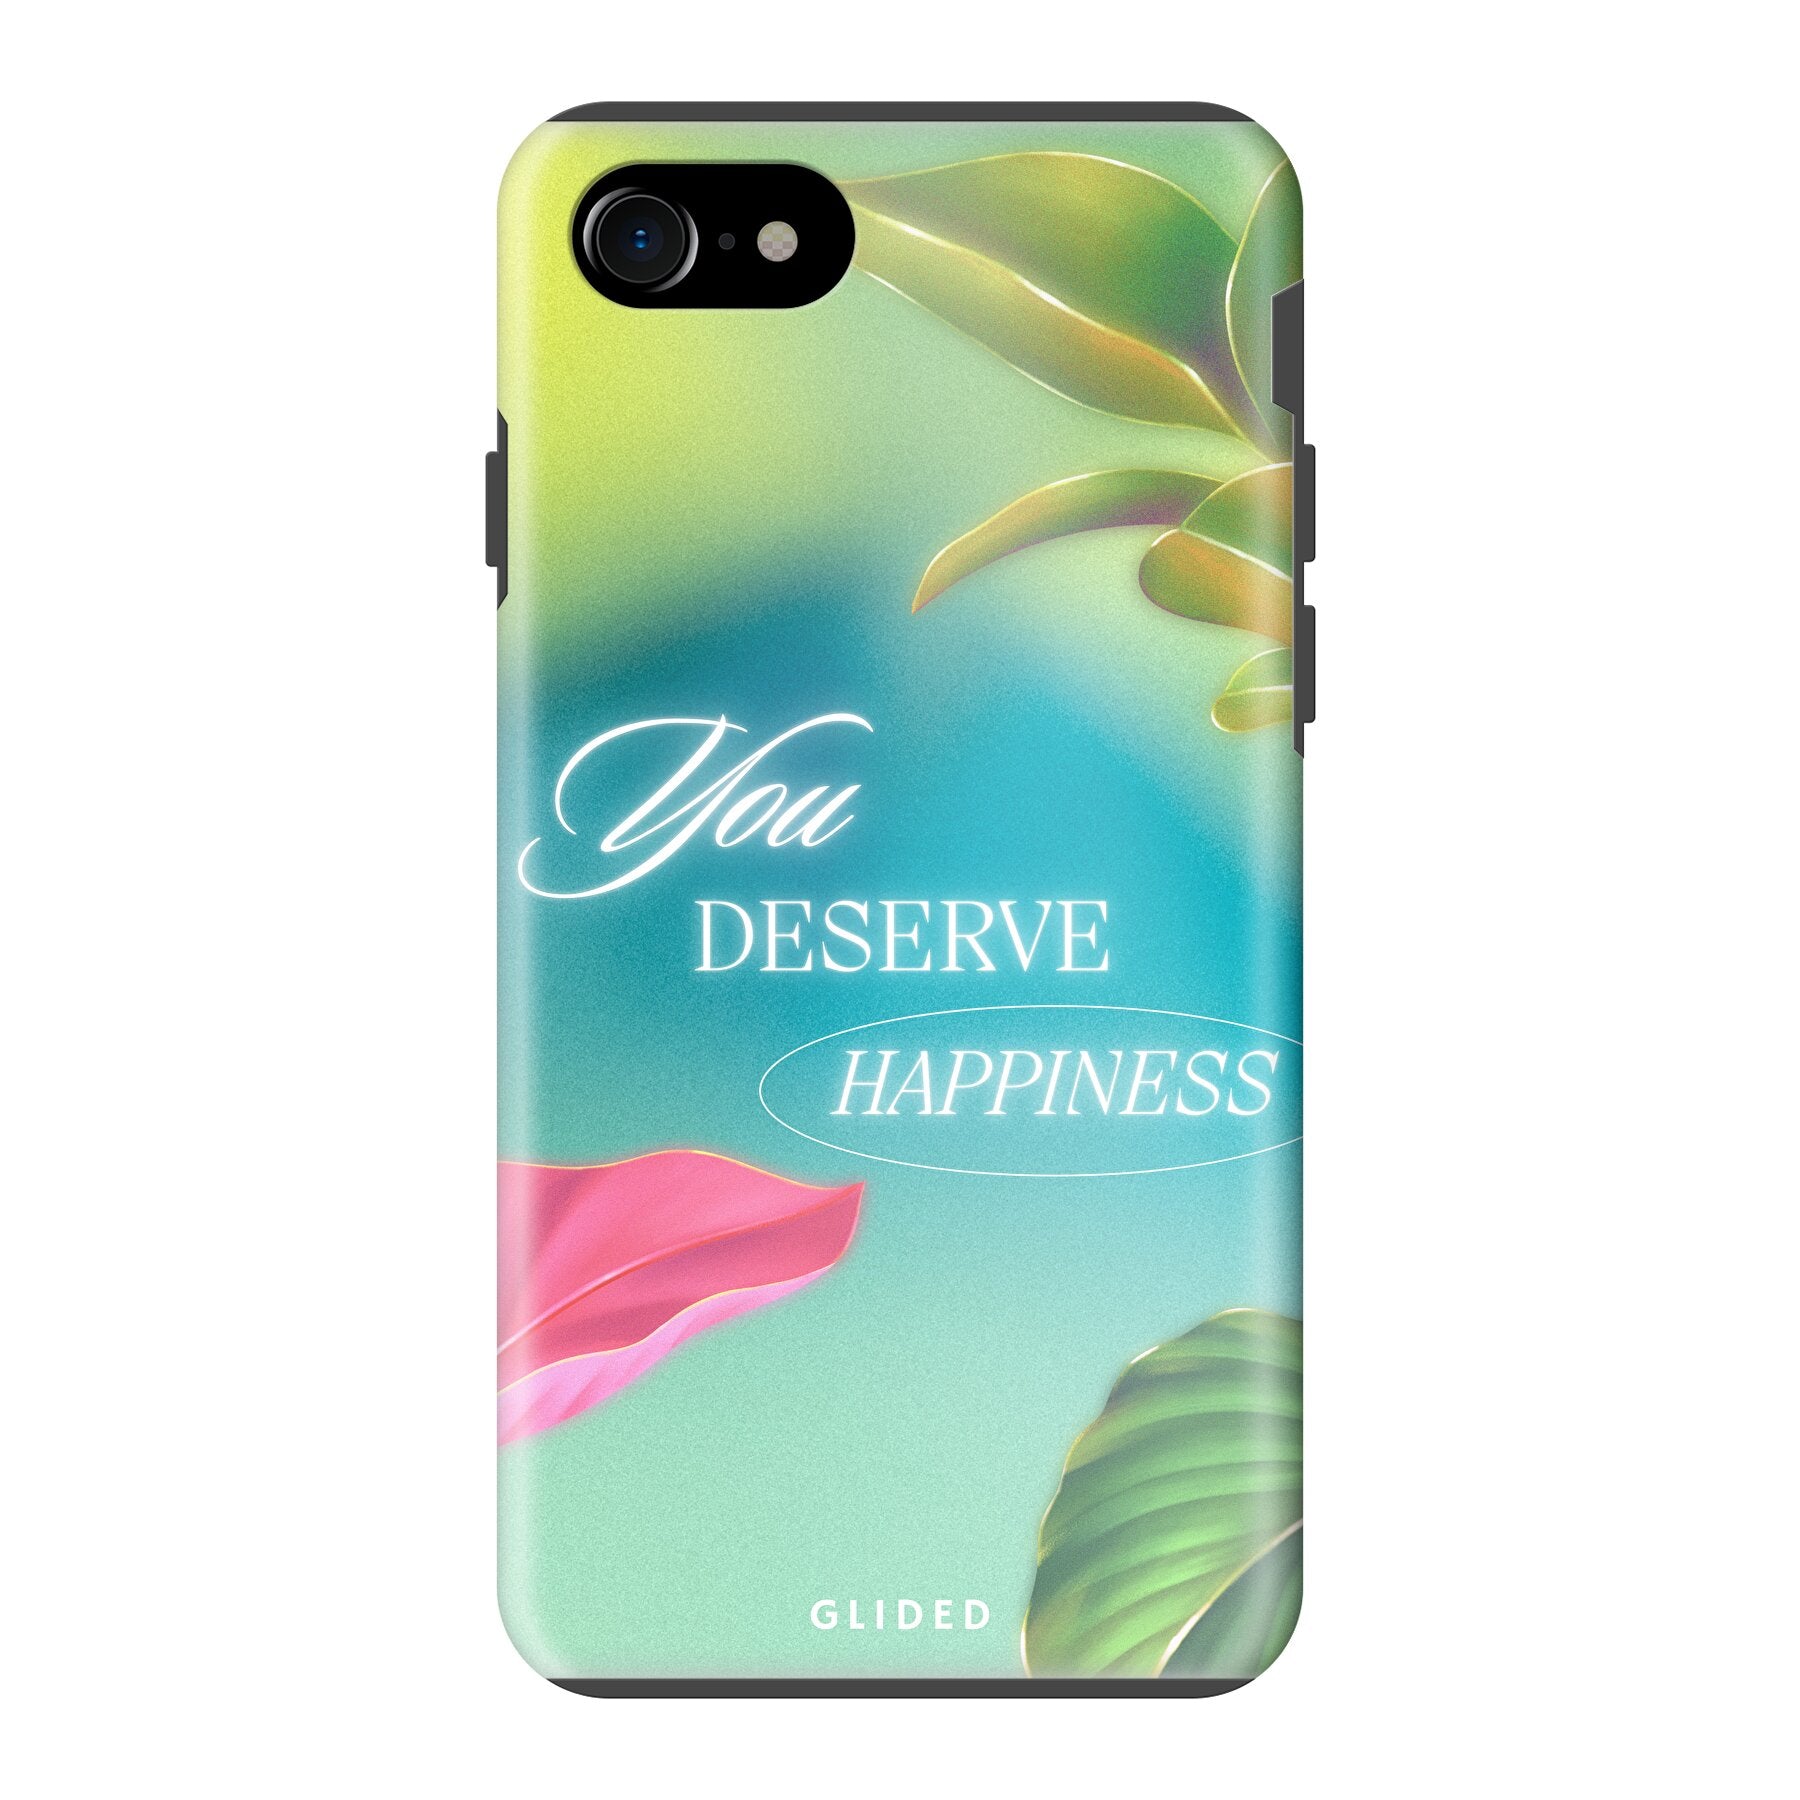 Happiness - iPhone 8 - Tough case